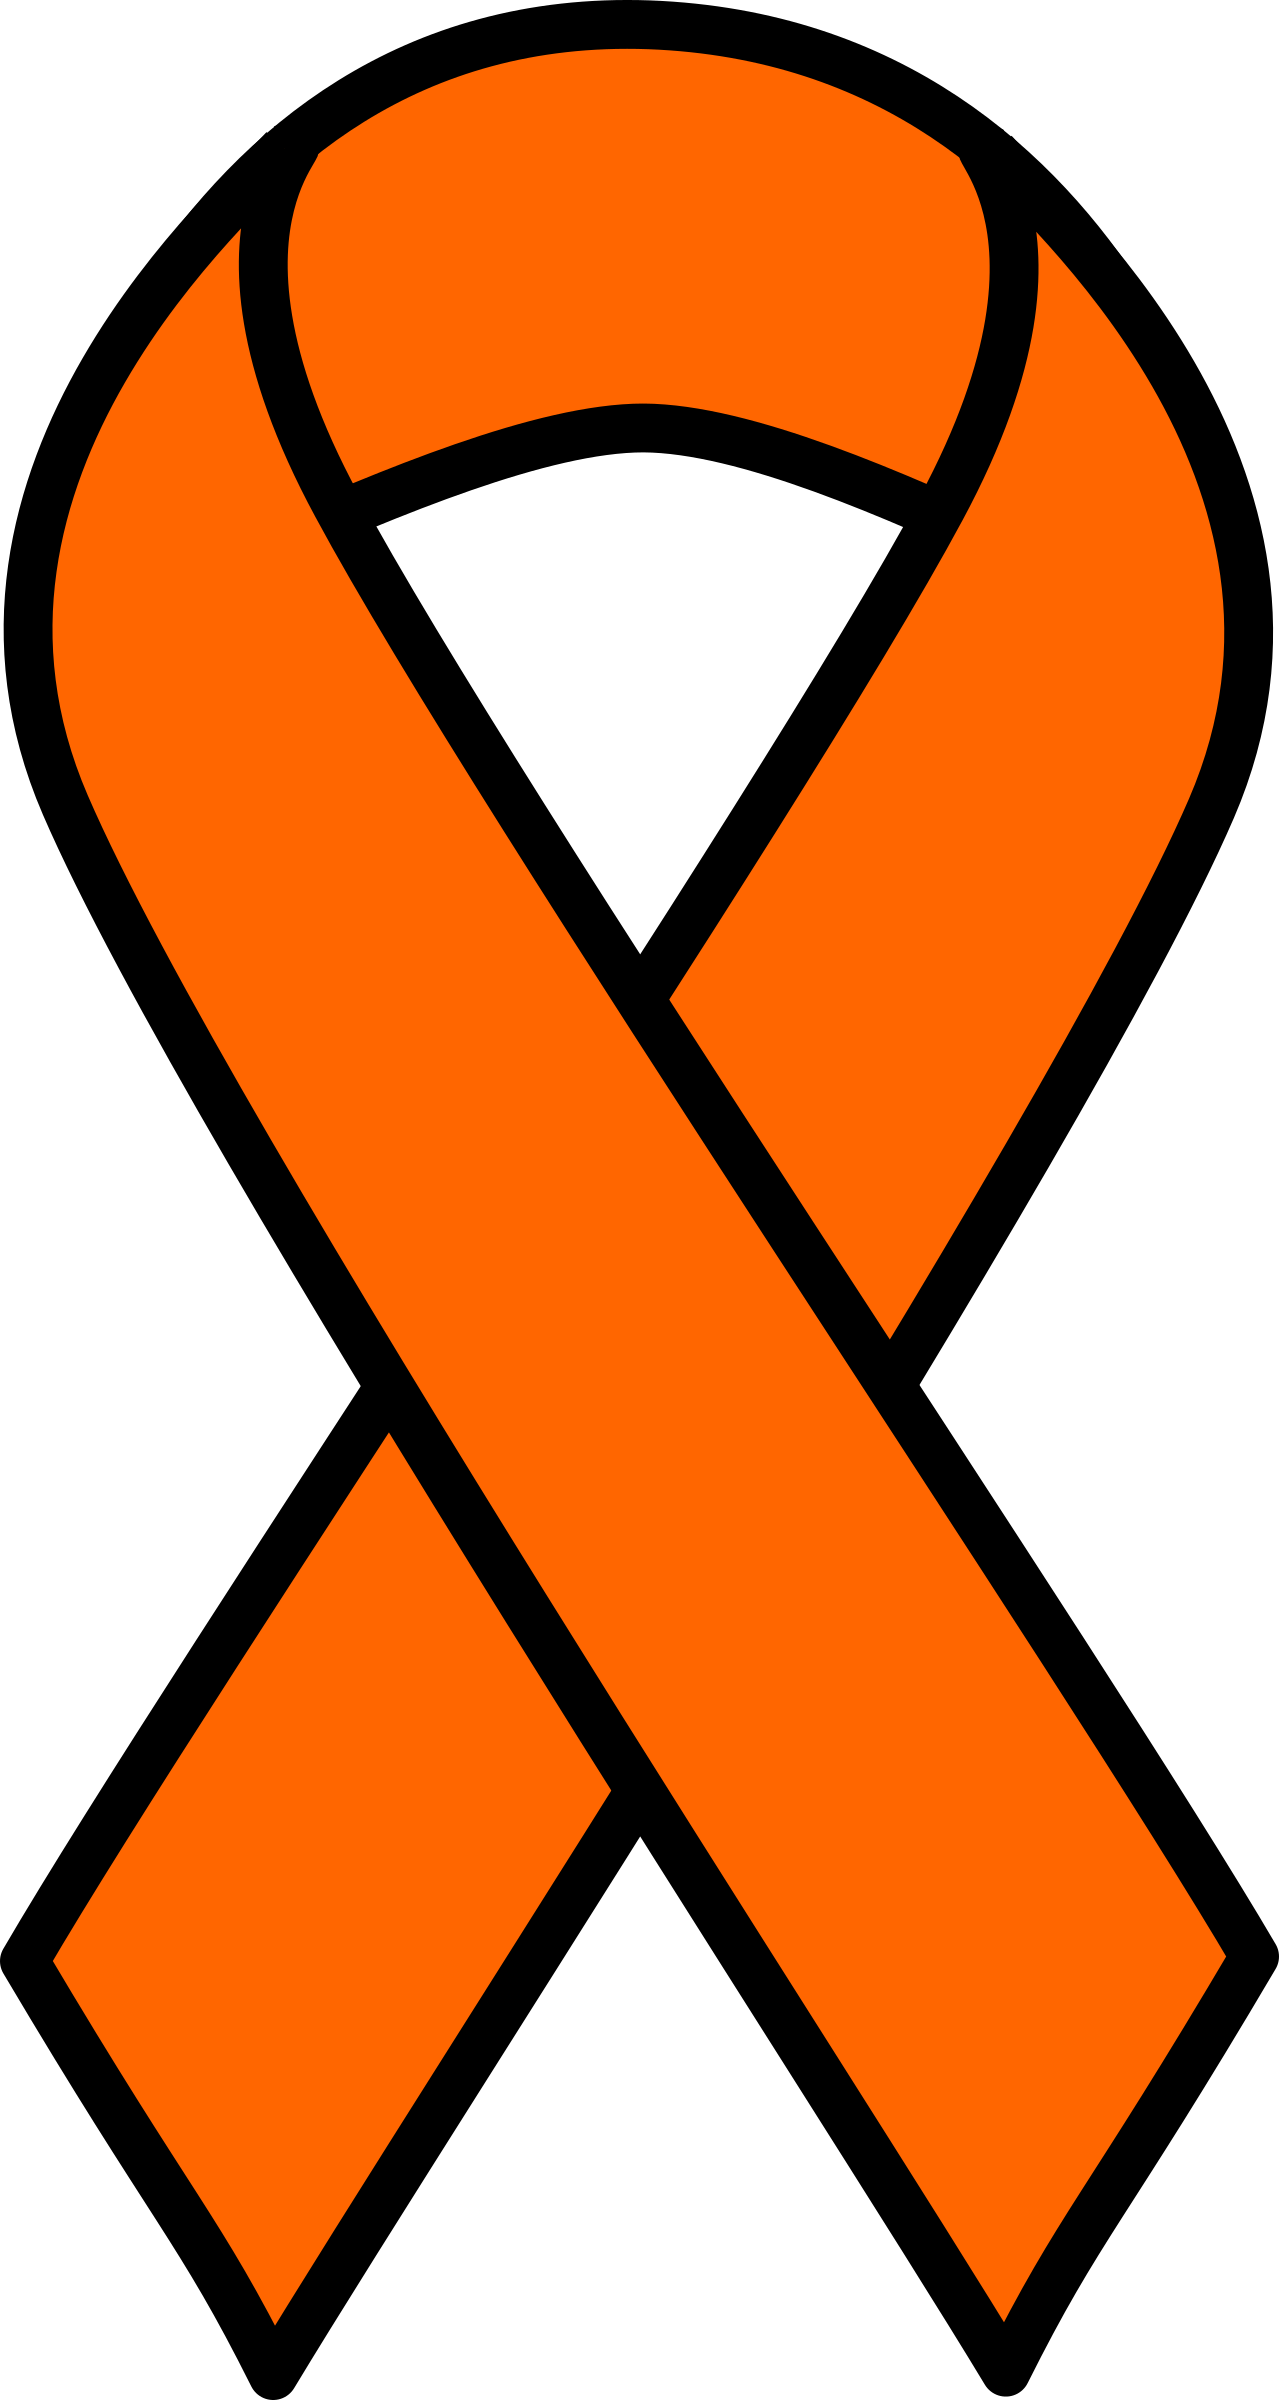 Gallery Of Clipart Orange Kidney Cancer And Leukemia - Gallery Of Clipart Orange Kidney Cancer And Leukemia (1279x2400)